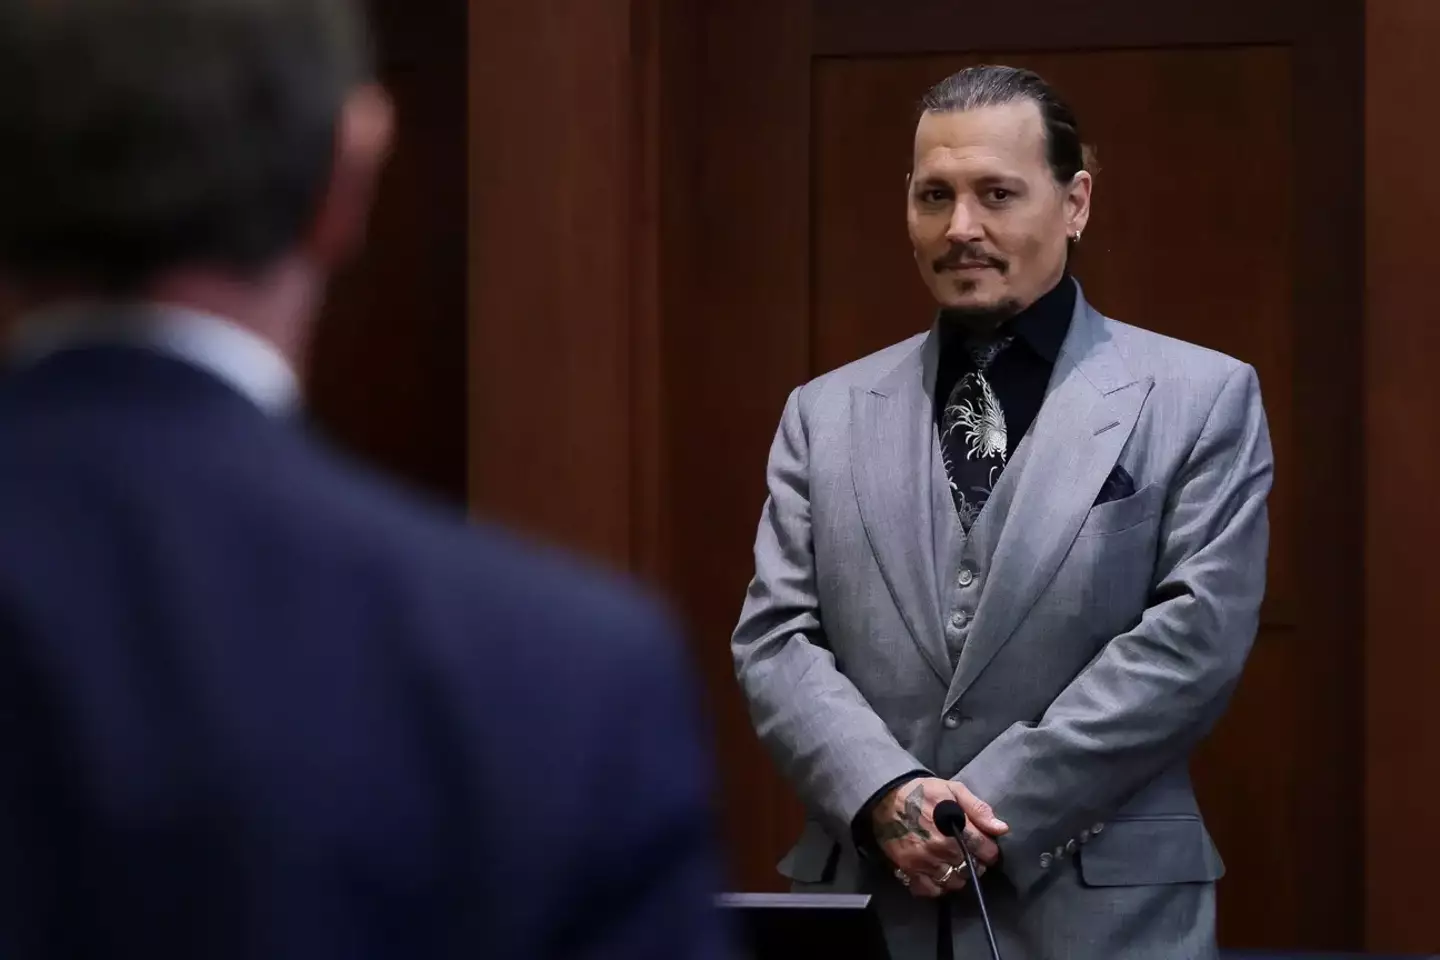 The jury ruled in favour of Johnny Depp.